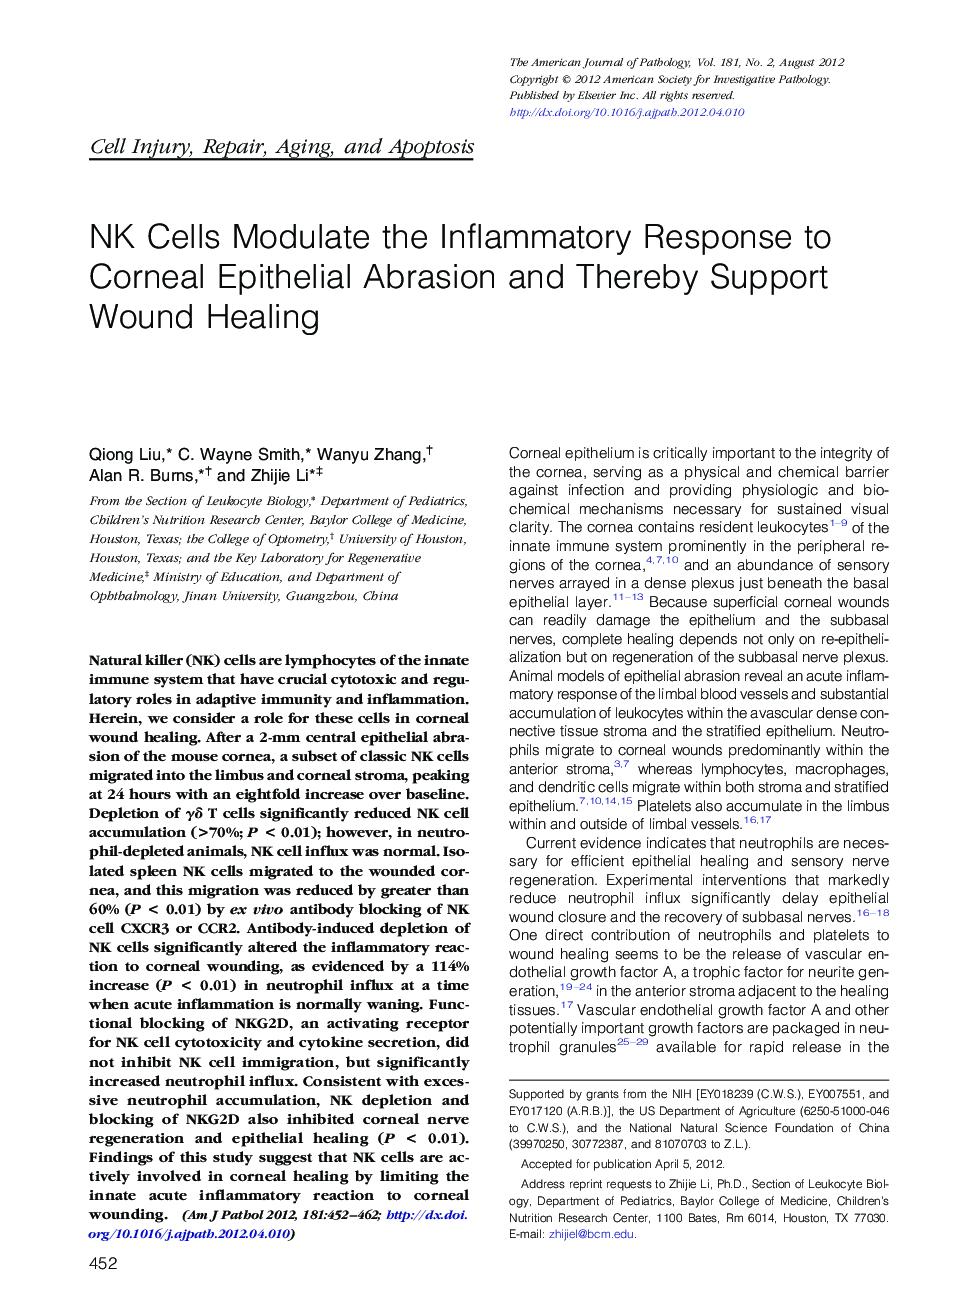 Regular articleCell injury, repair, aging, and apoptosisNK Cells Modulate the Inflammatory Response to Corneal Epithelial Abrasion and Thereby Support Wound Healing